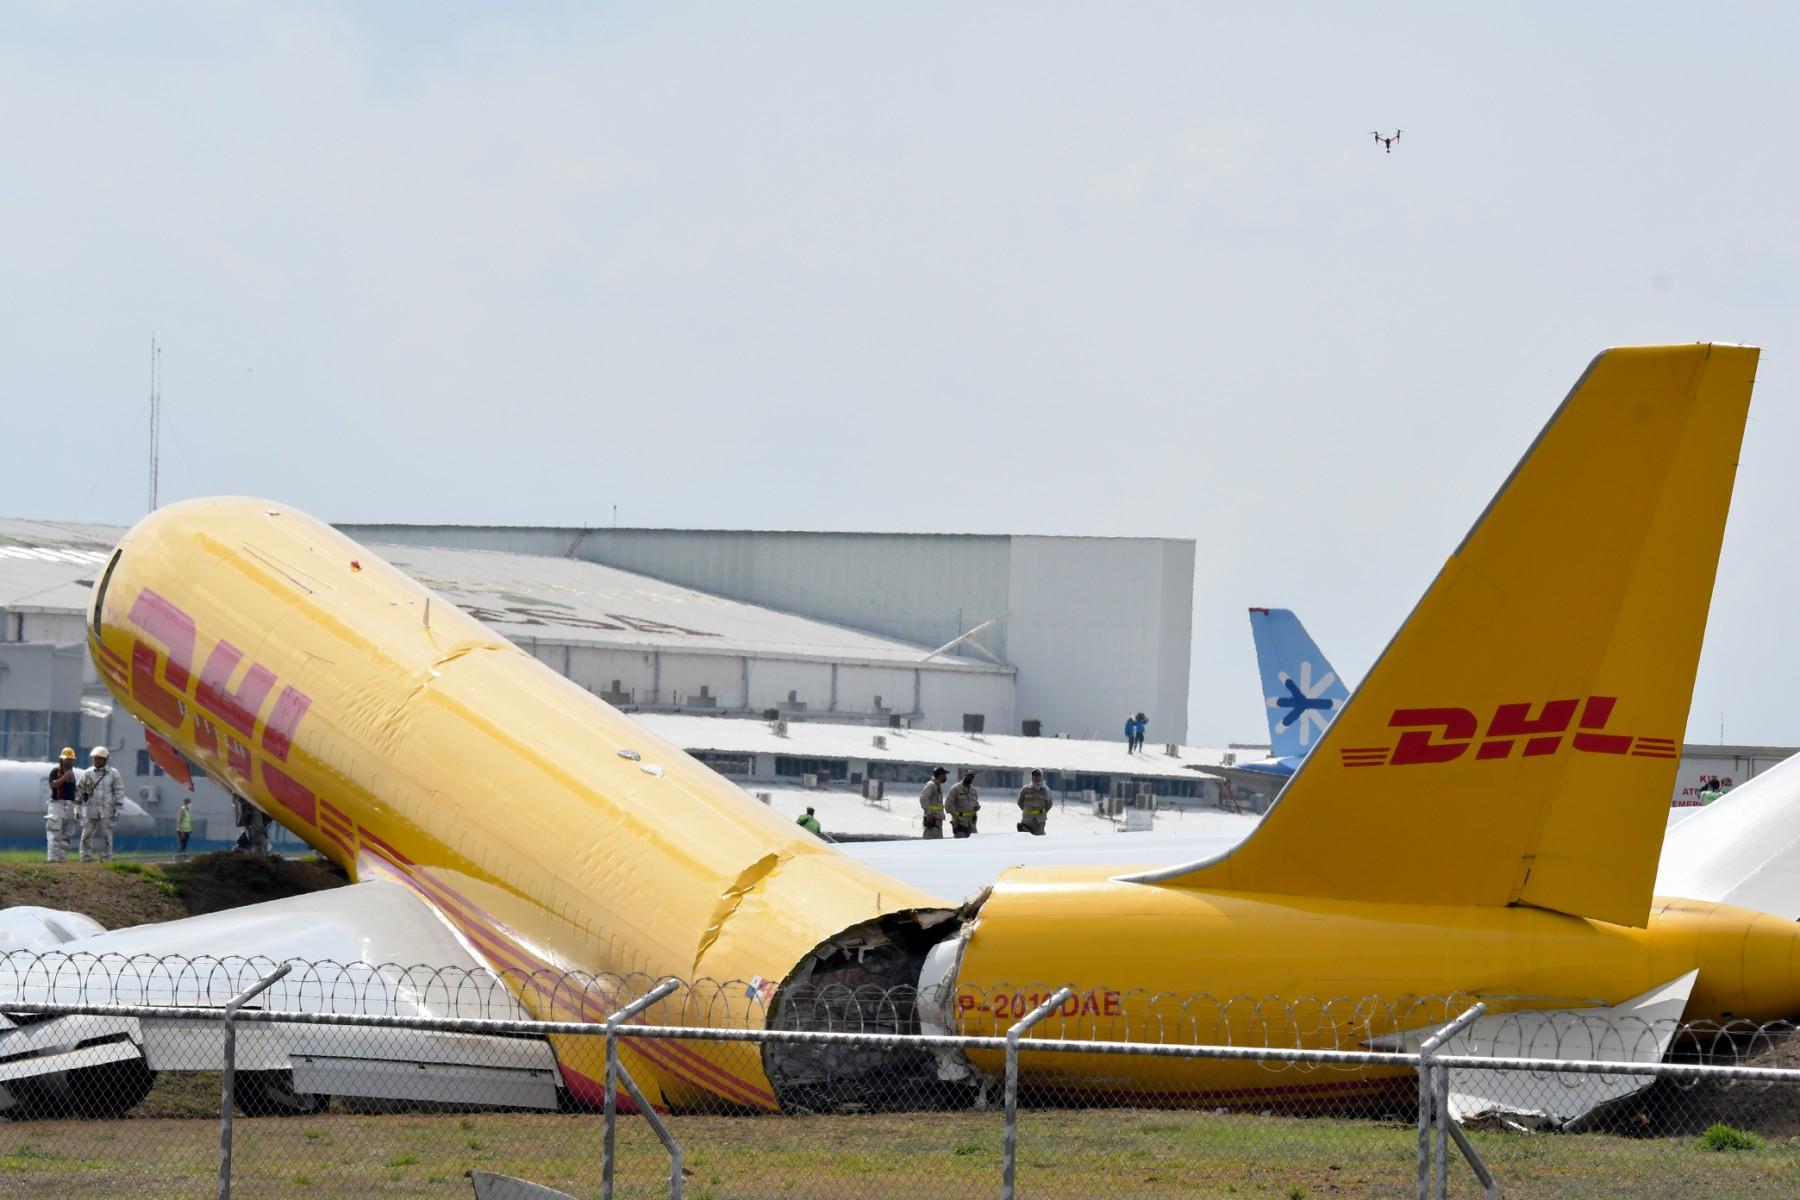 A DHL cargo plane is seen after emergency landing at the Juan Santa Maria international airport due to a mechanical problem, in Alajuela, Costa Rica, on April 7. Photo: AFP